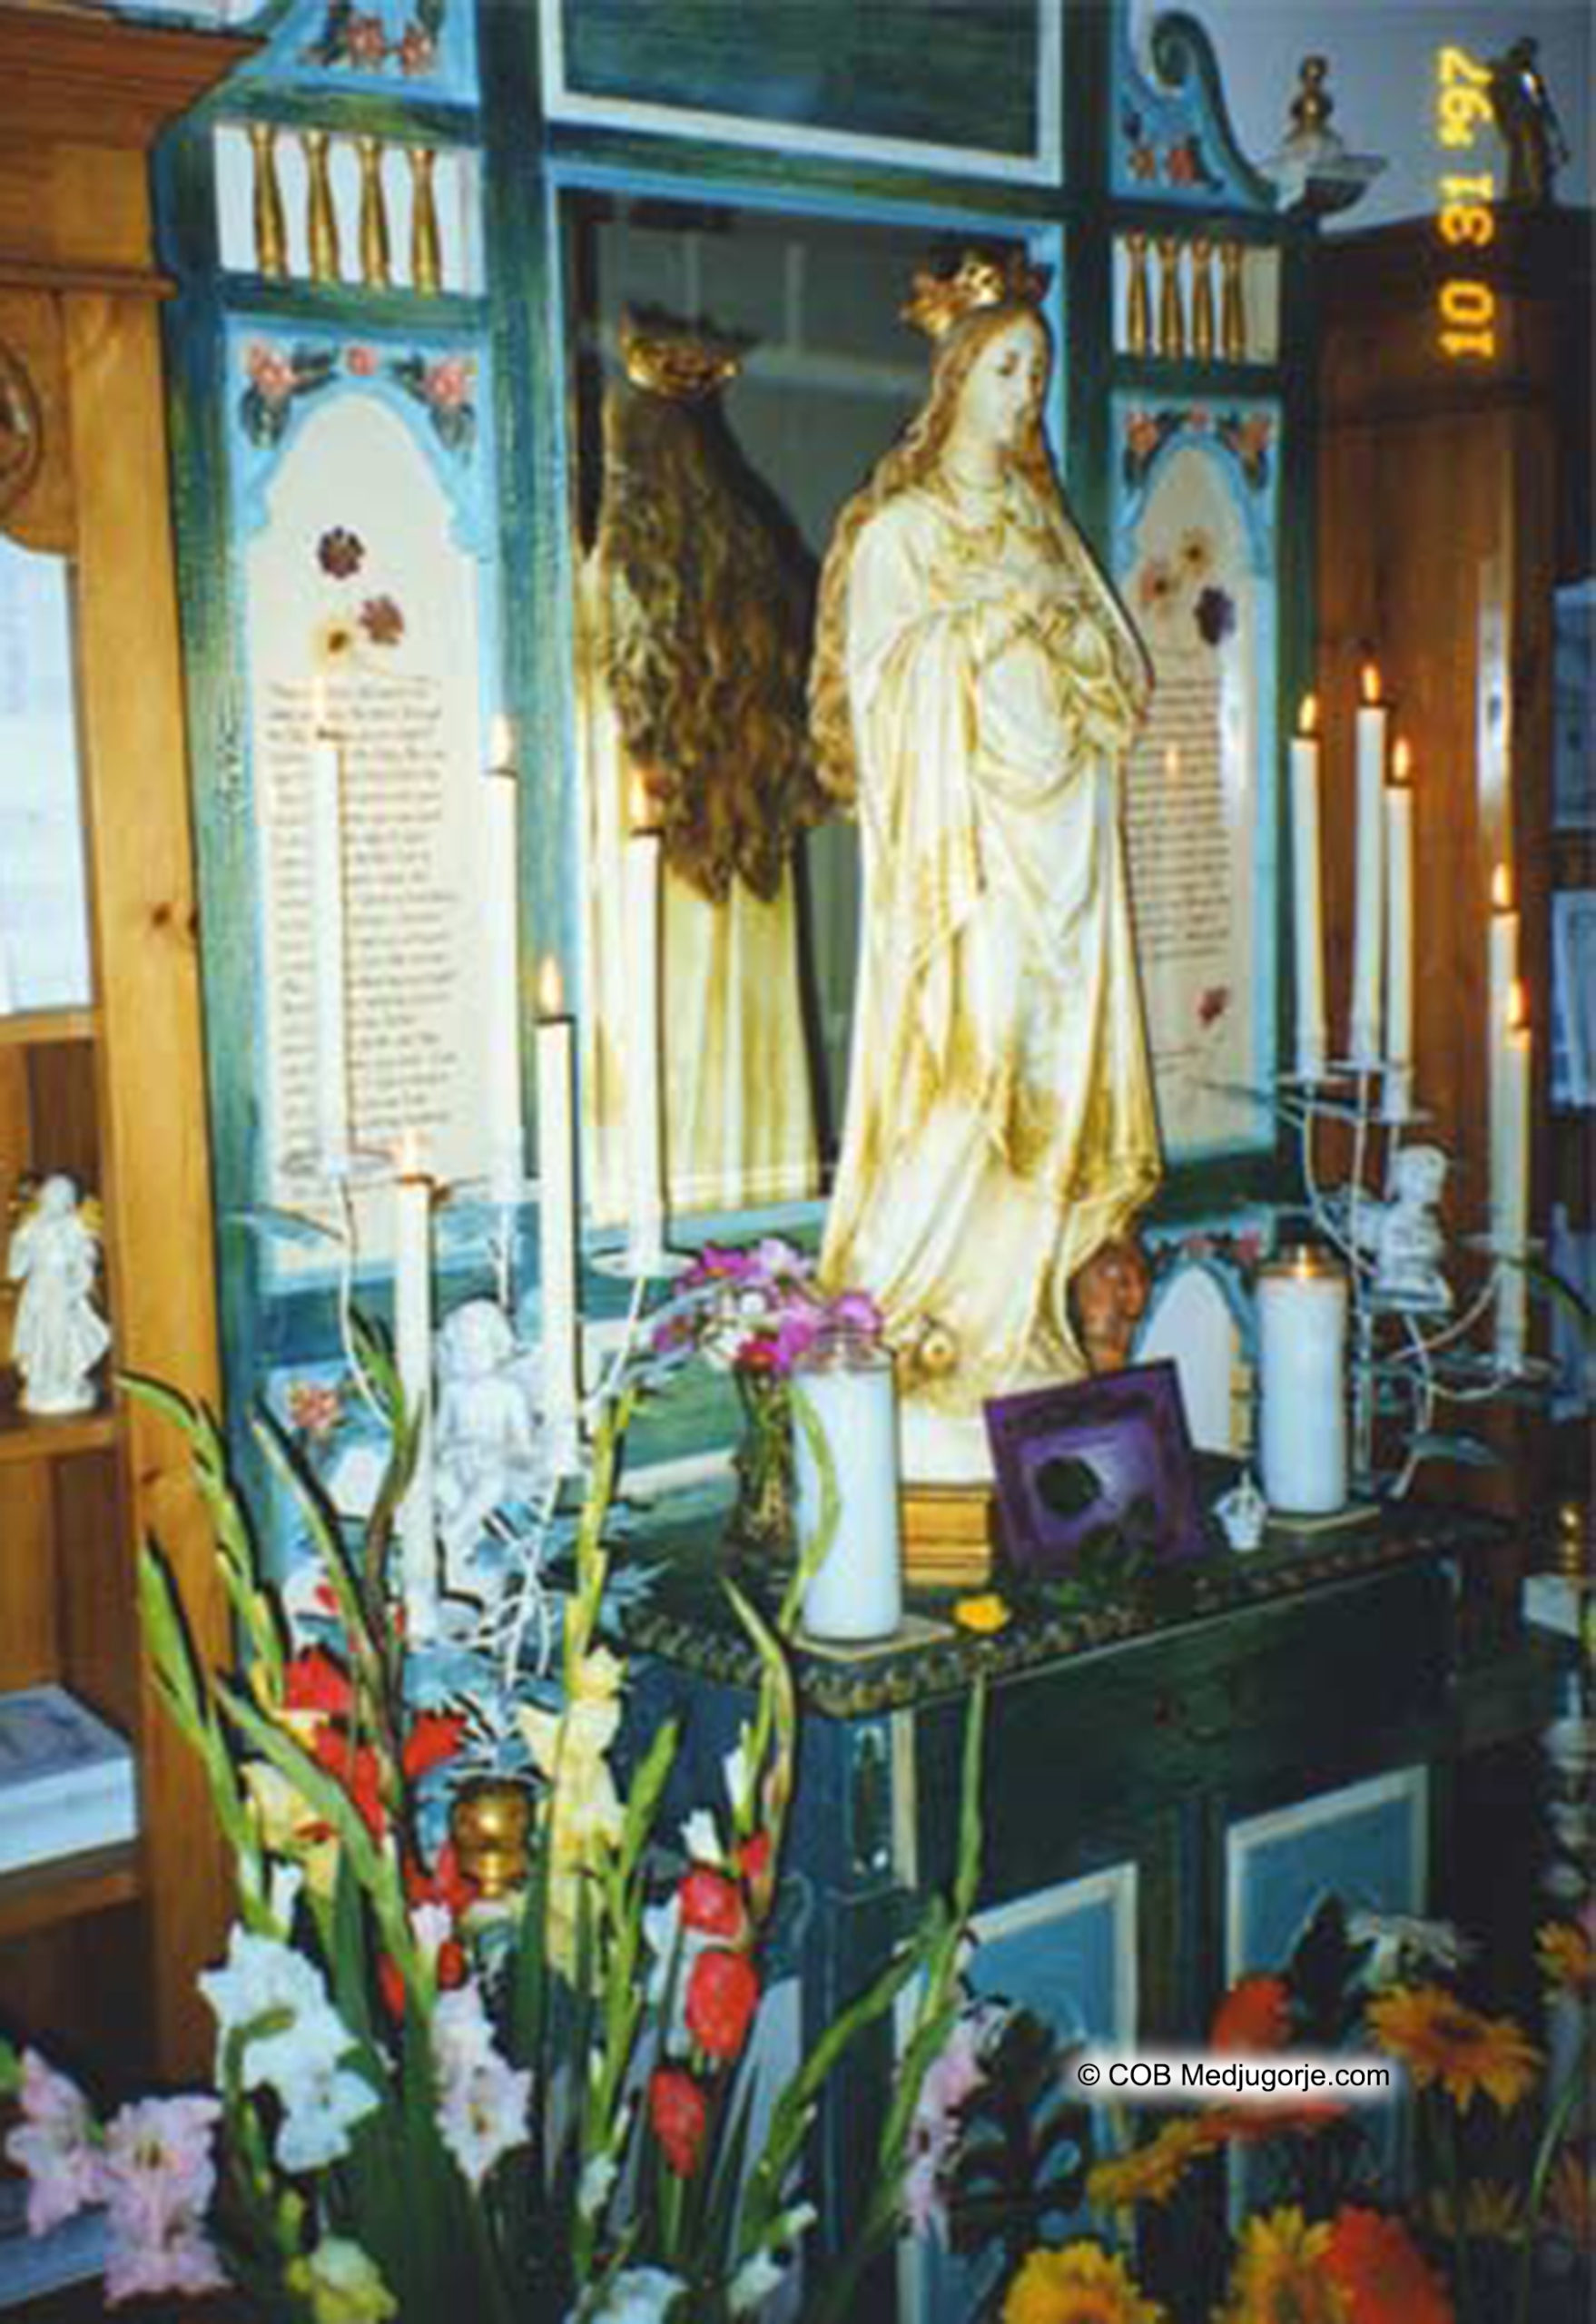 Apparition of Our Lady in the Caritas Mission House